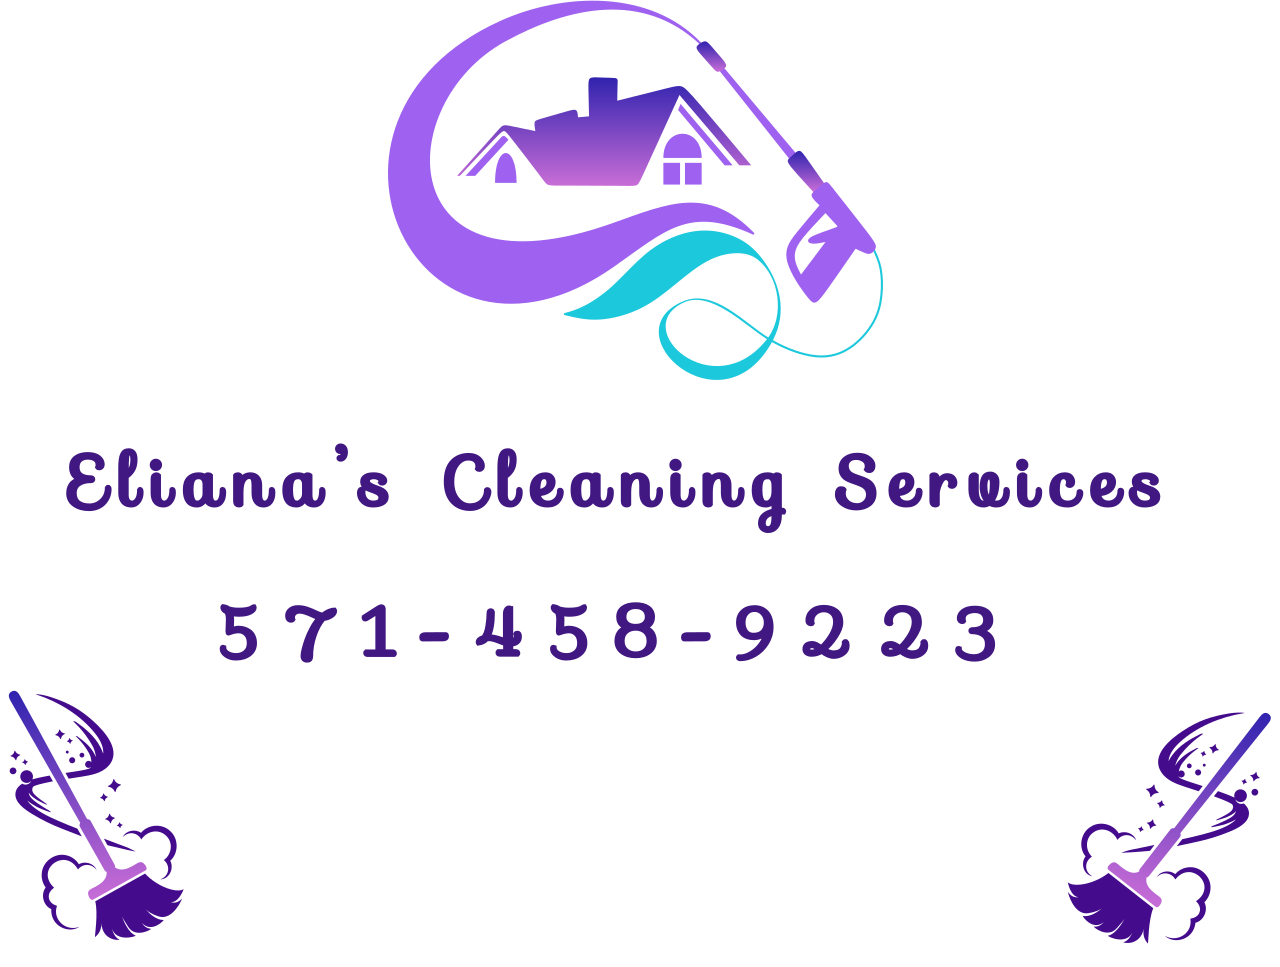 Eliana’s Cleaning Services 's logo